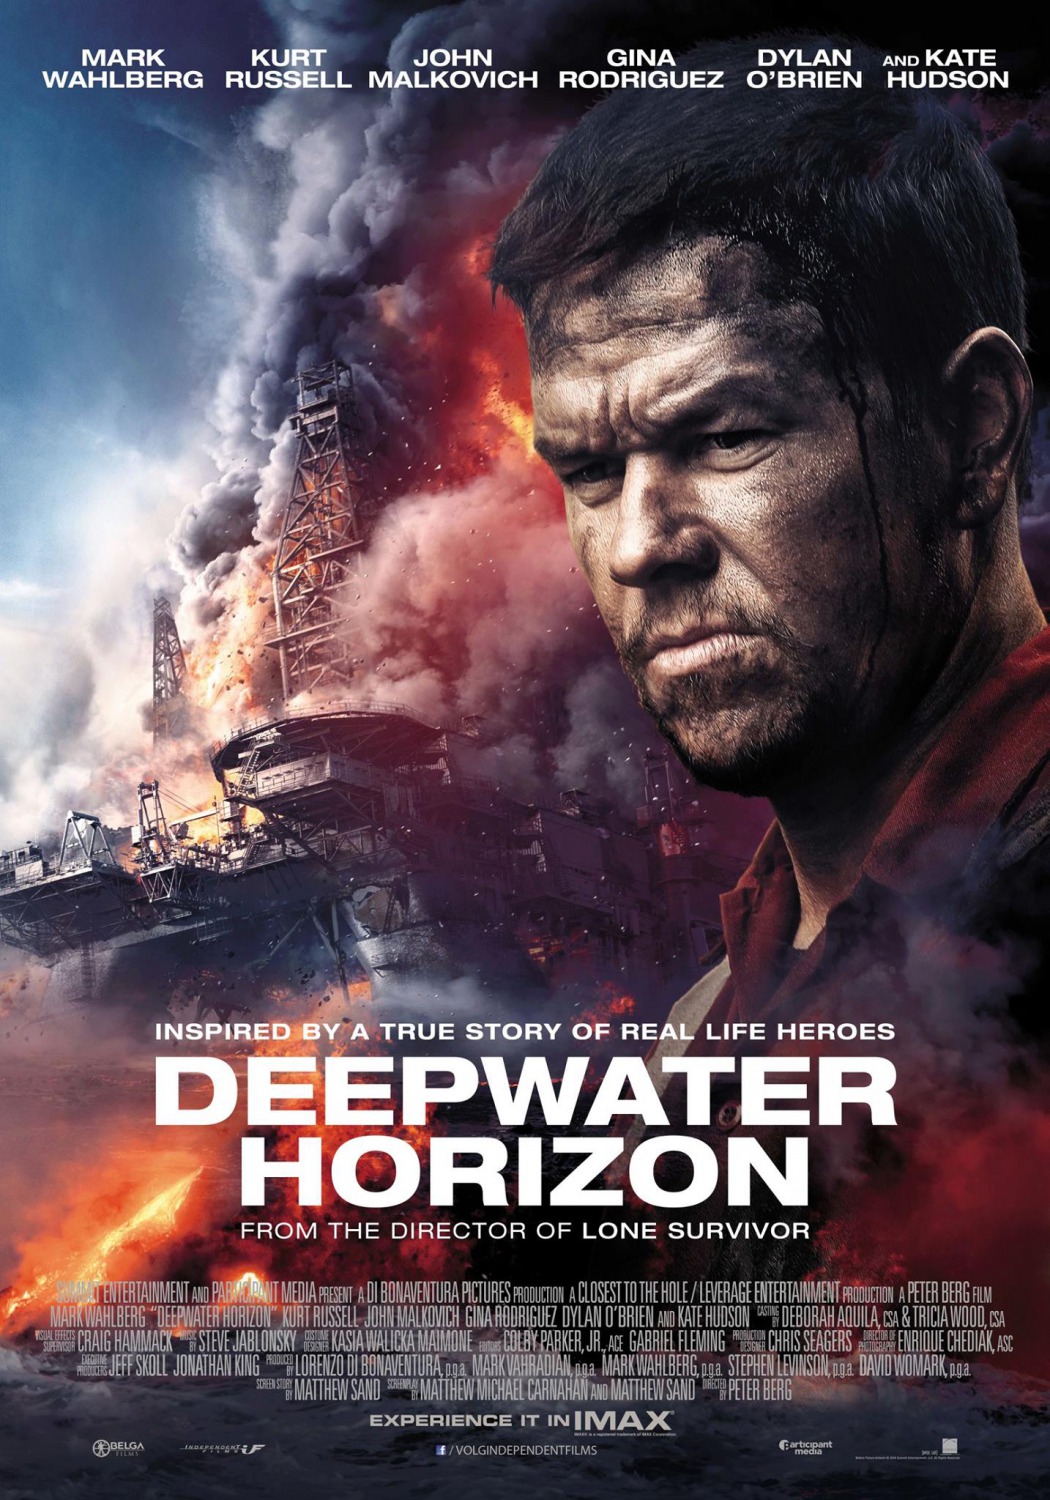 IMDb - Here's an exclusive IMAX poster for Deepwater Horizon with Mark  Wahlberg